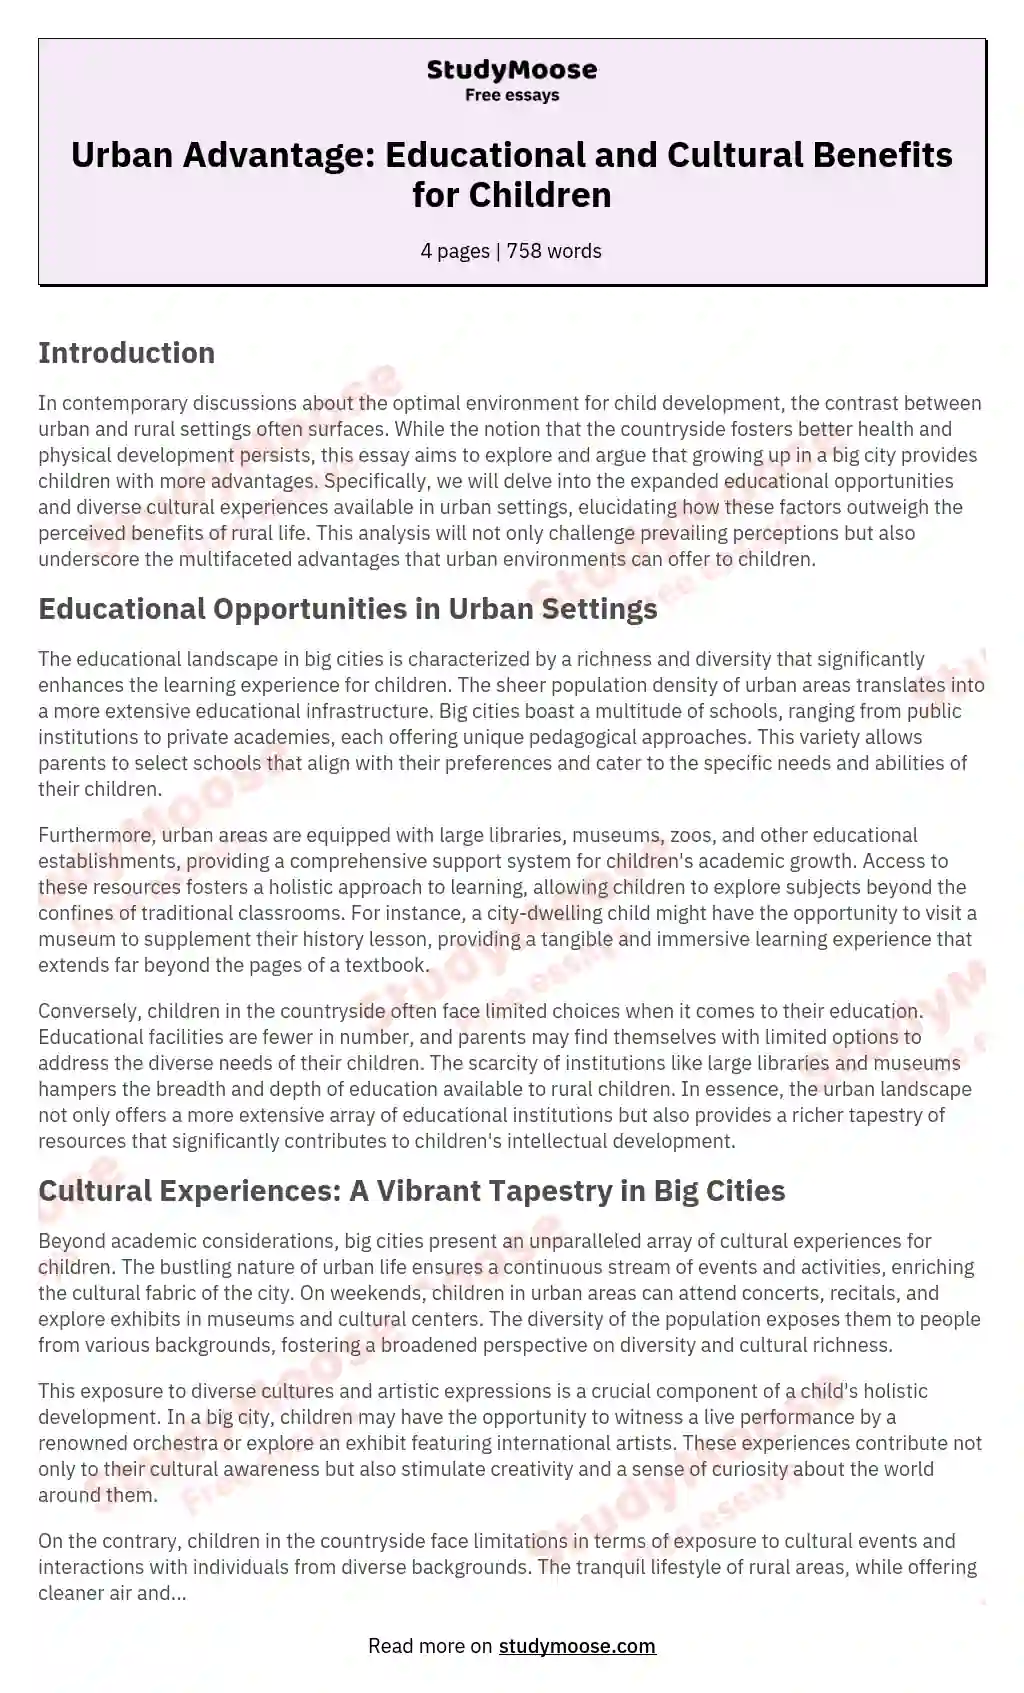 Urban Advantage: Educational and Cultural Benefits for Children essay